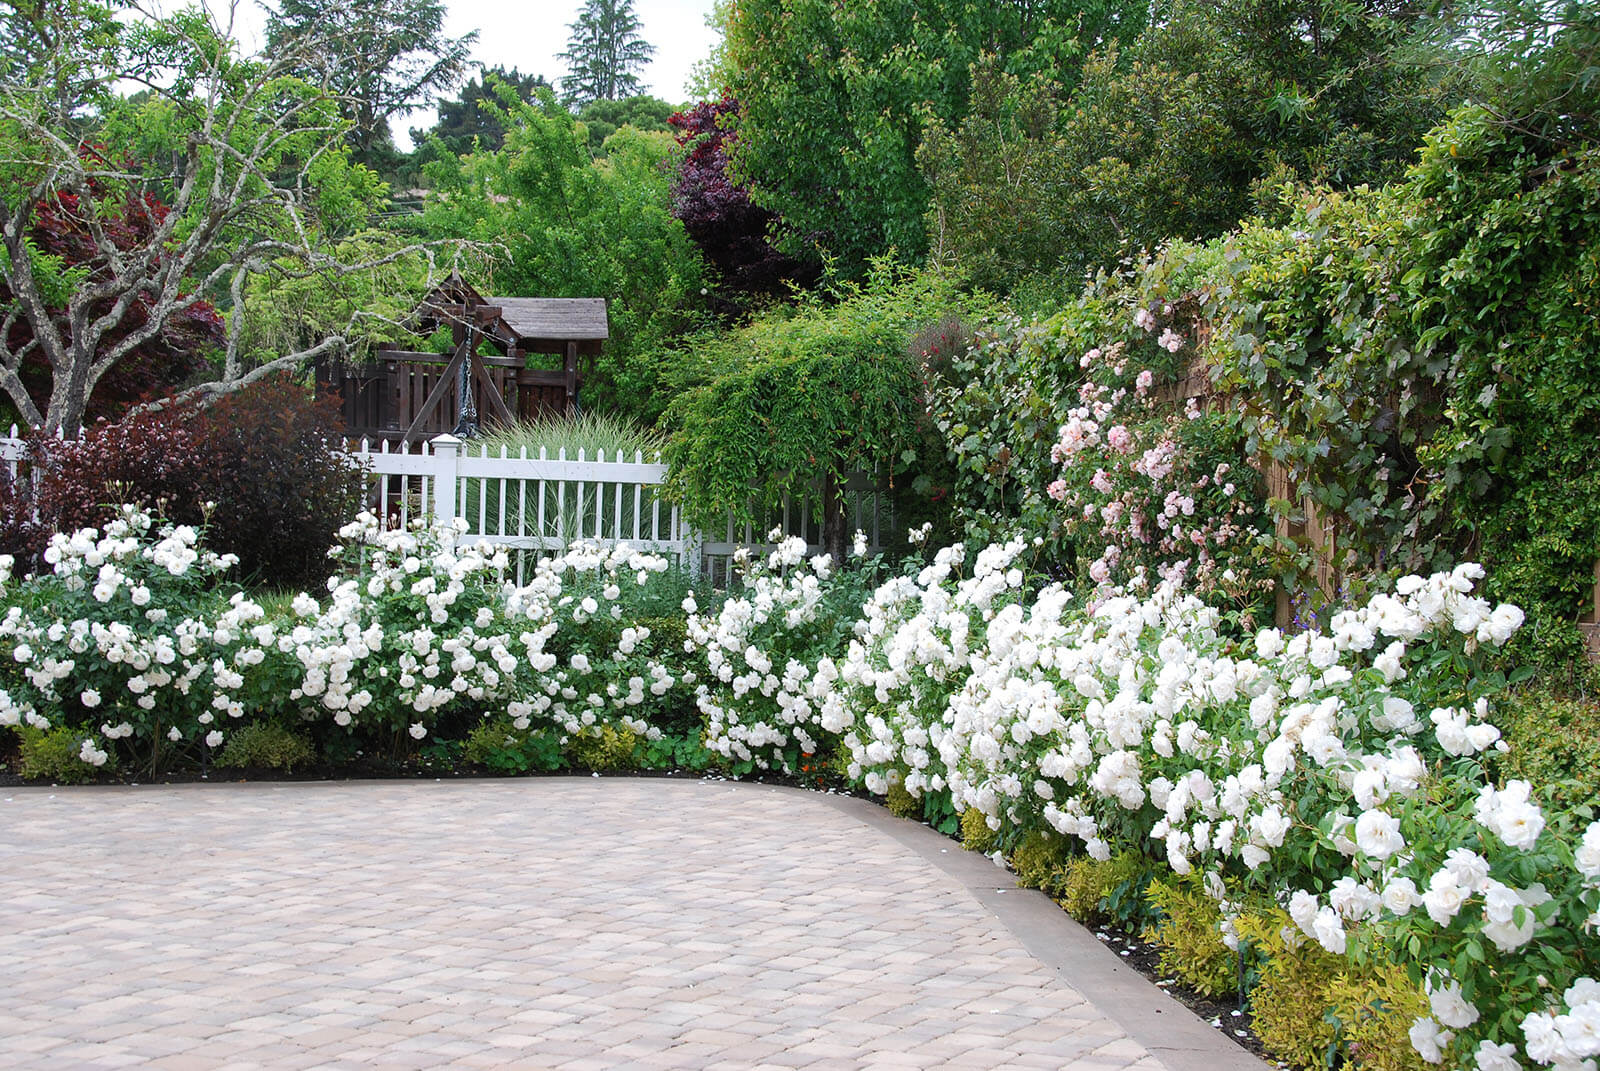 stone tile patio with stone lighting and fully bloomed white roses all around, with climbing plants on the far wall